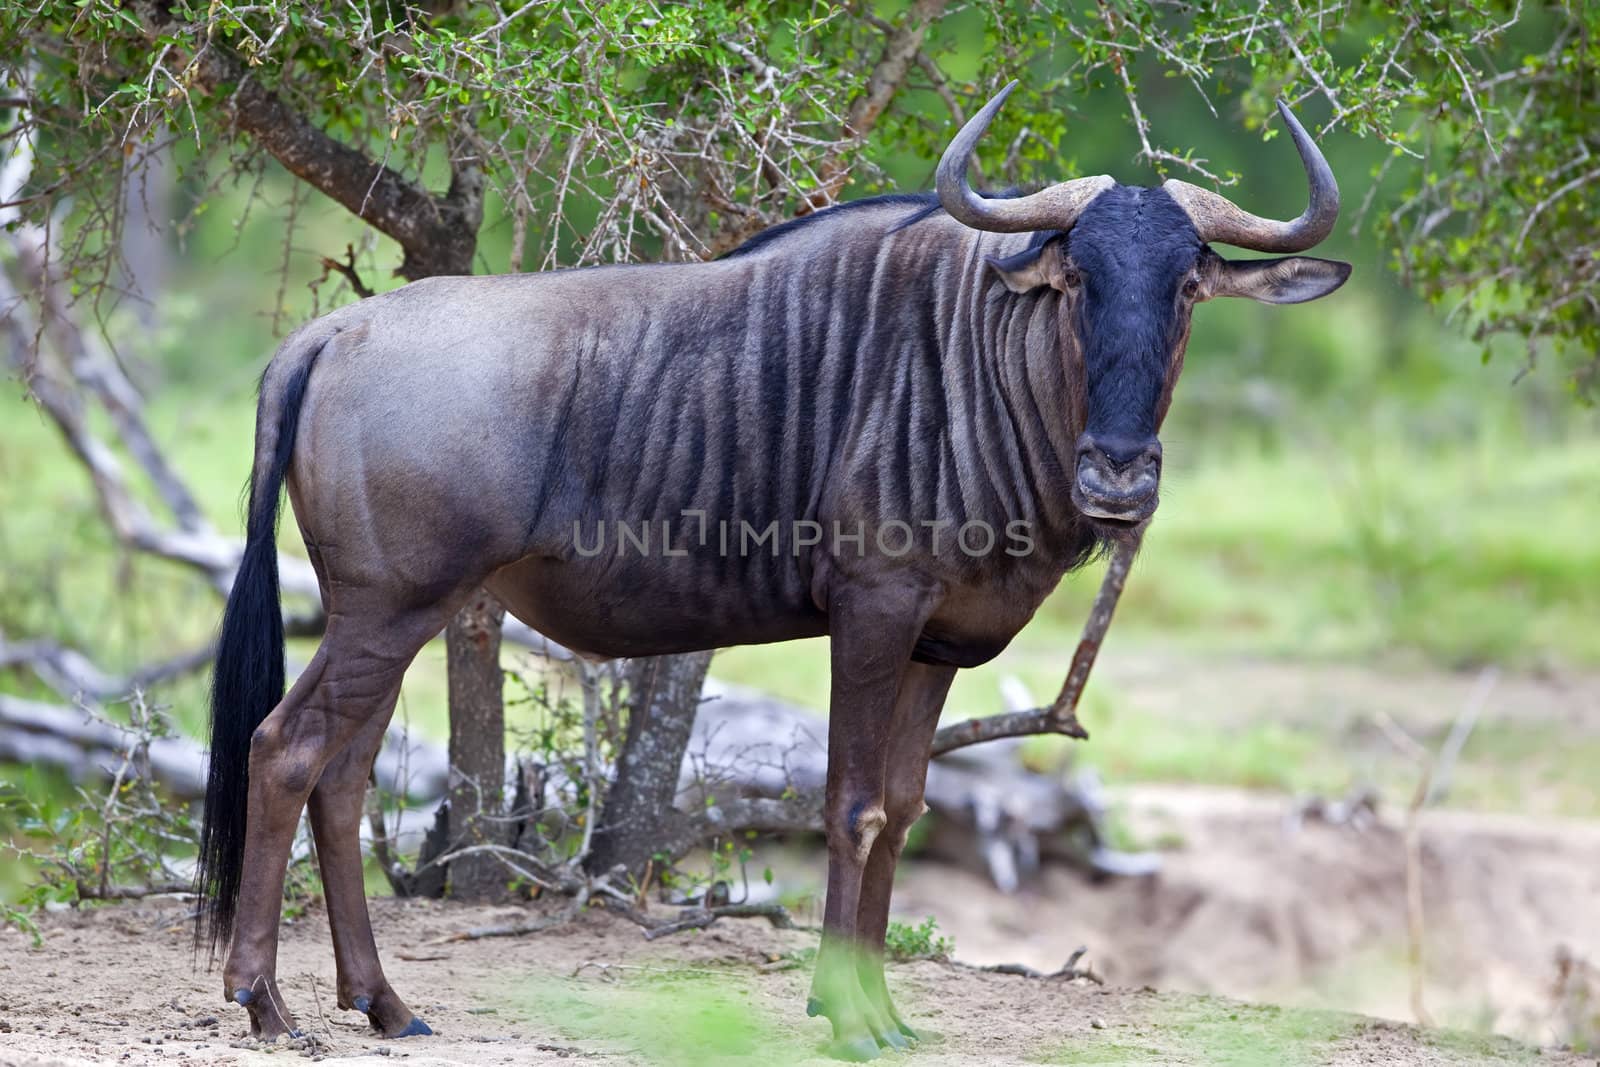 Blue wildebeest photographed in the African bush